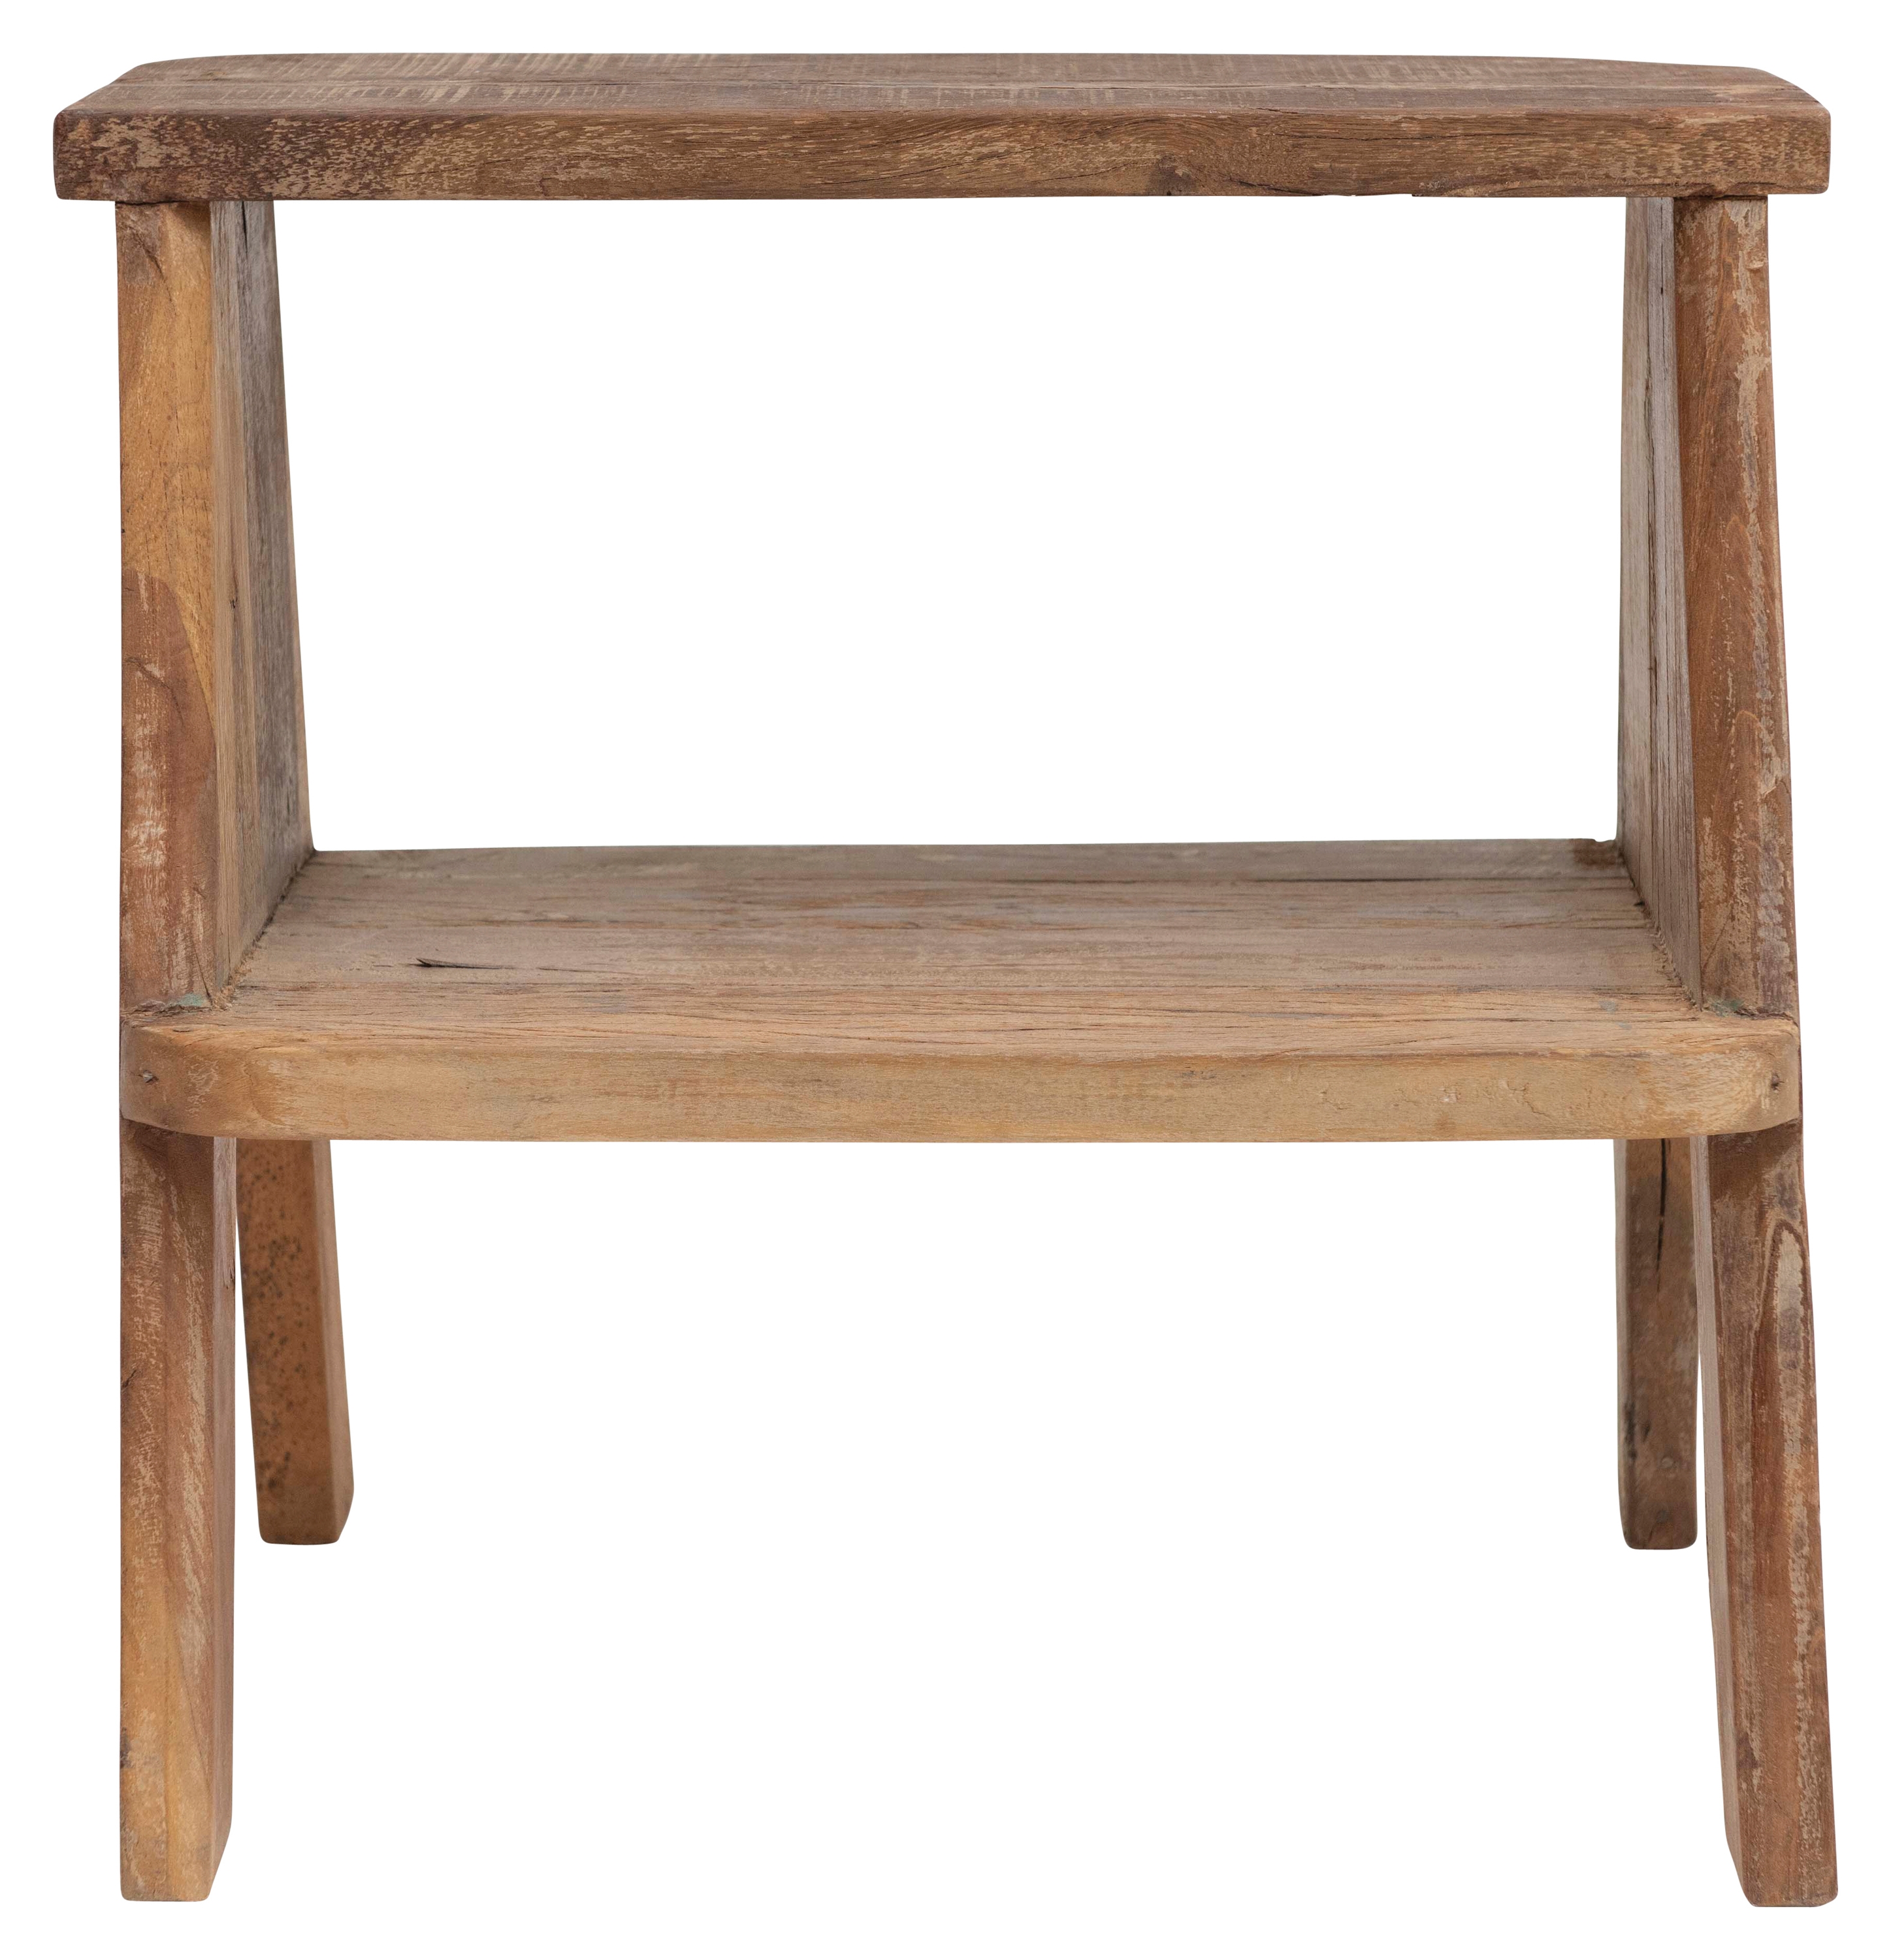 Reclaimed Wood Step Stool/Accent Table with Shelf - Image 0